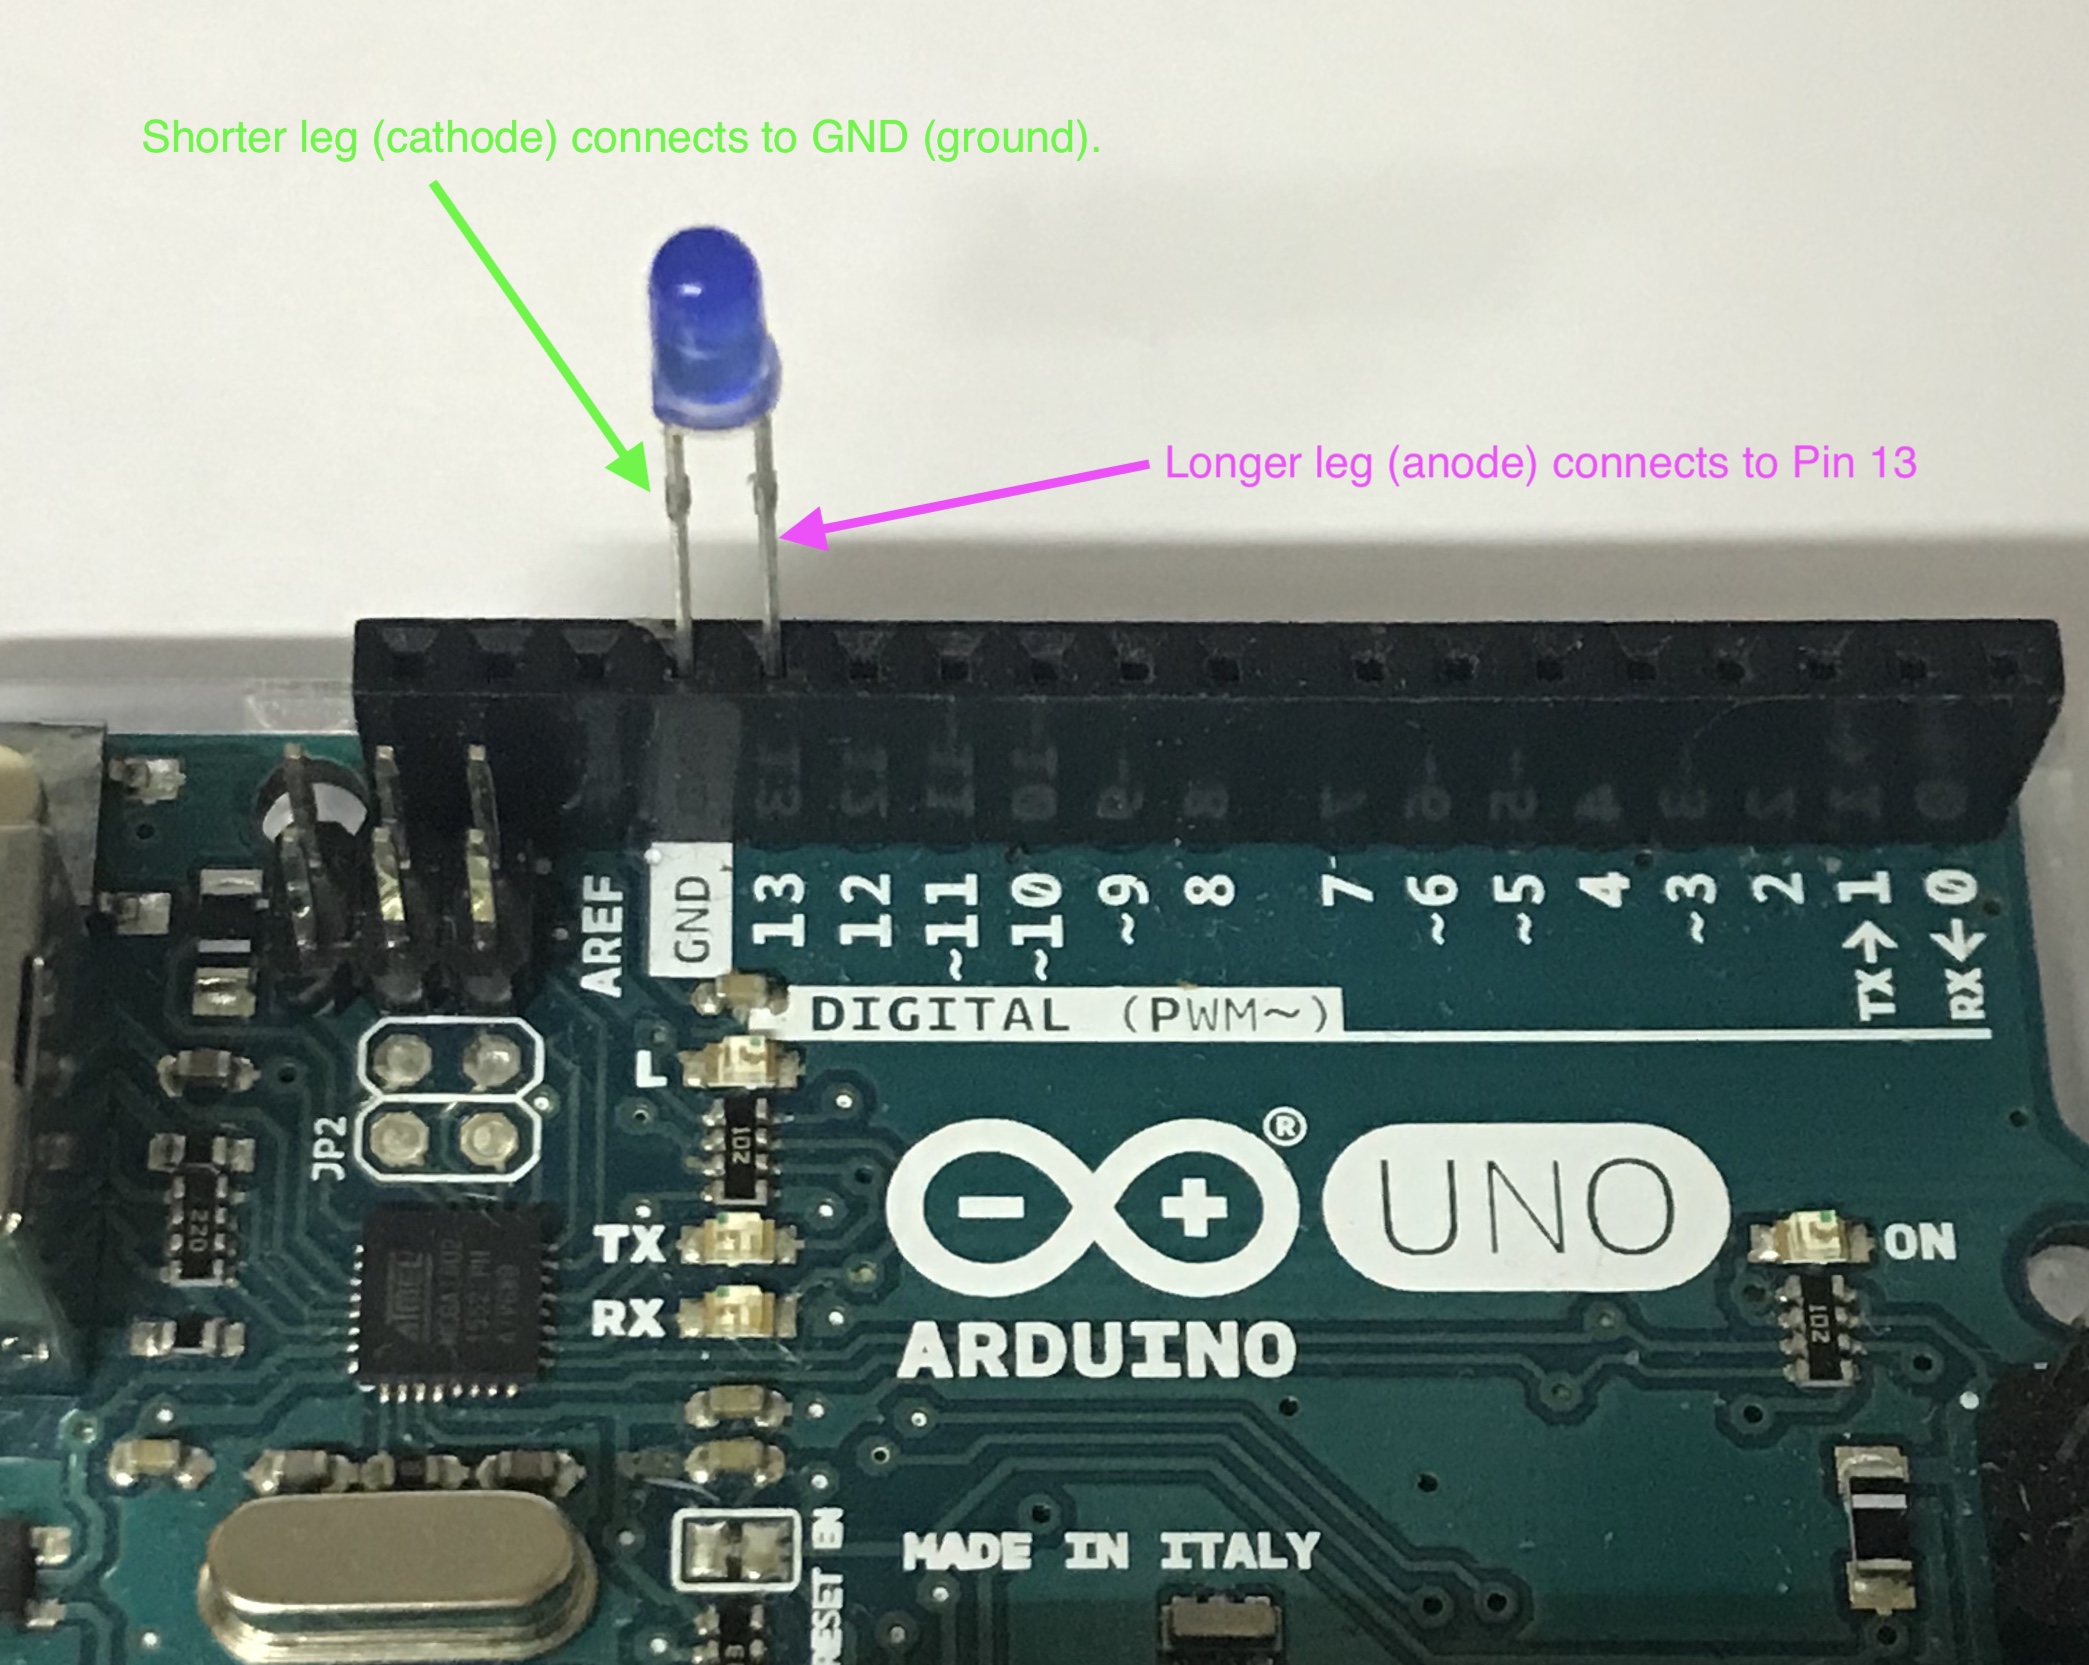 Connect the LED directly to the Arduino board